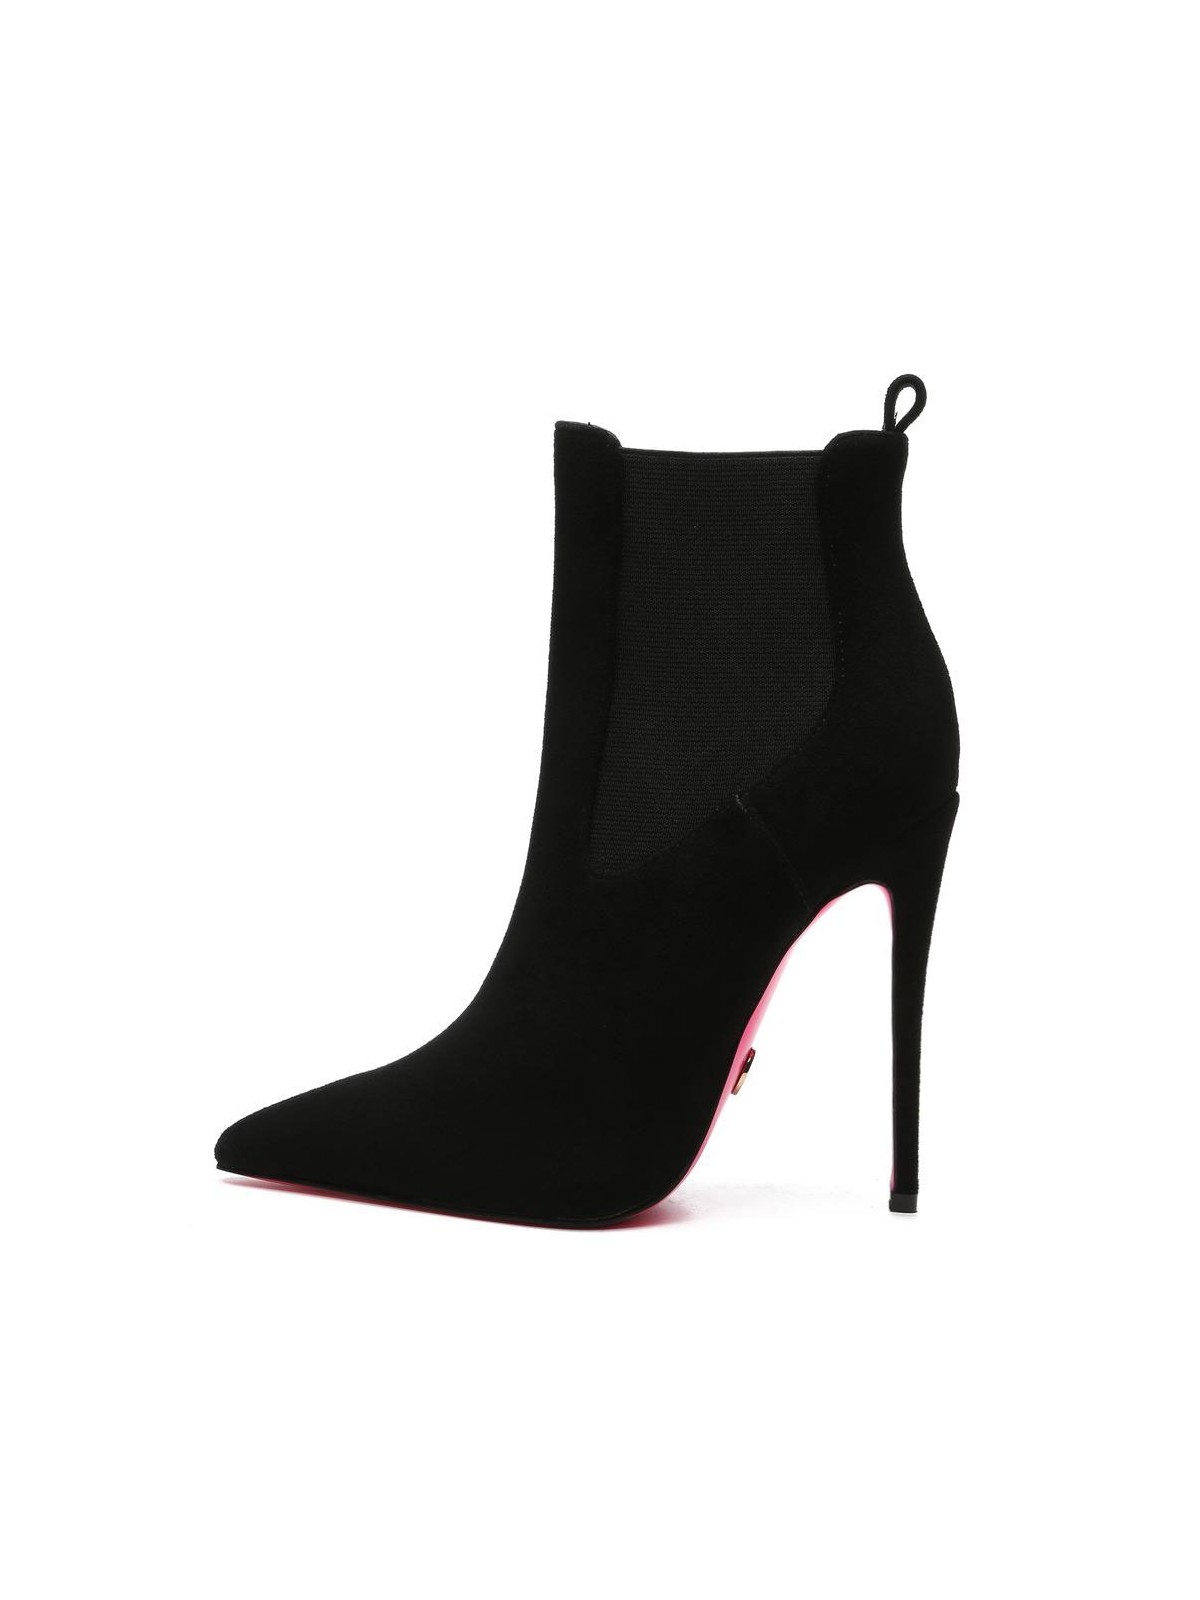 Giaro TYCLONE black ankle boots with silver studs